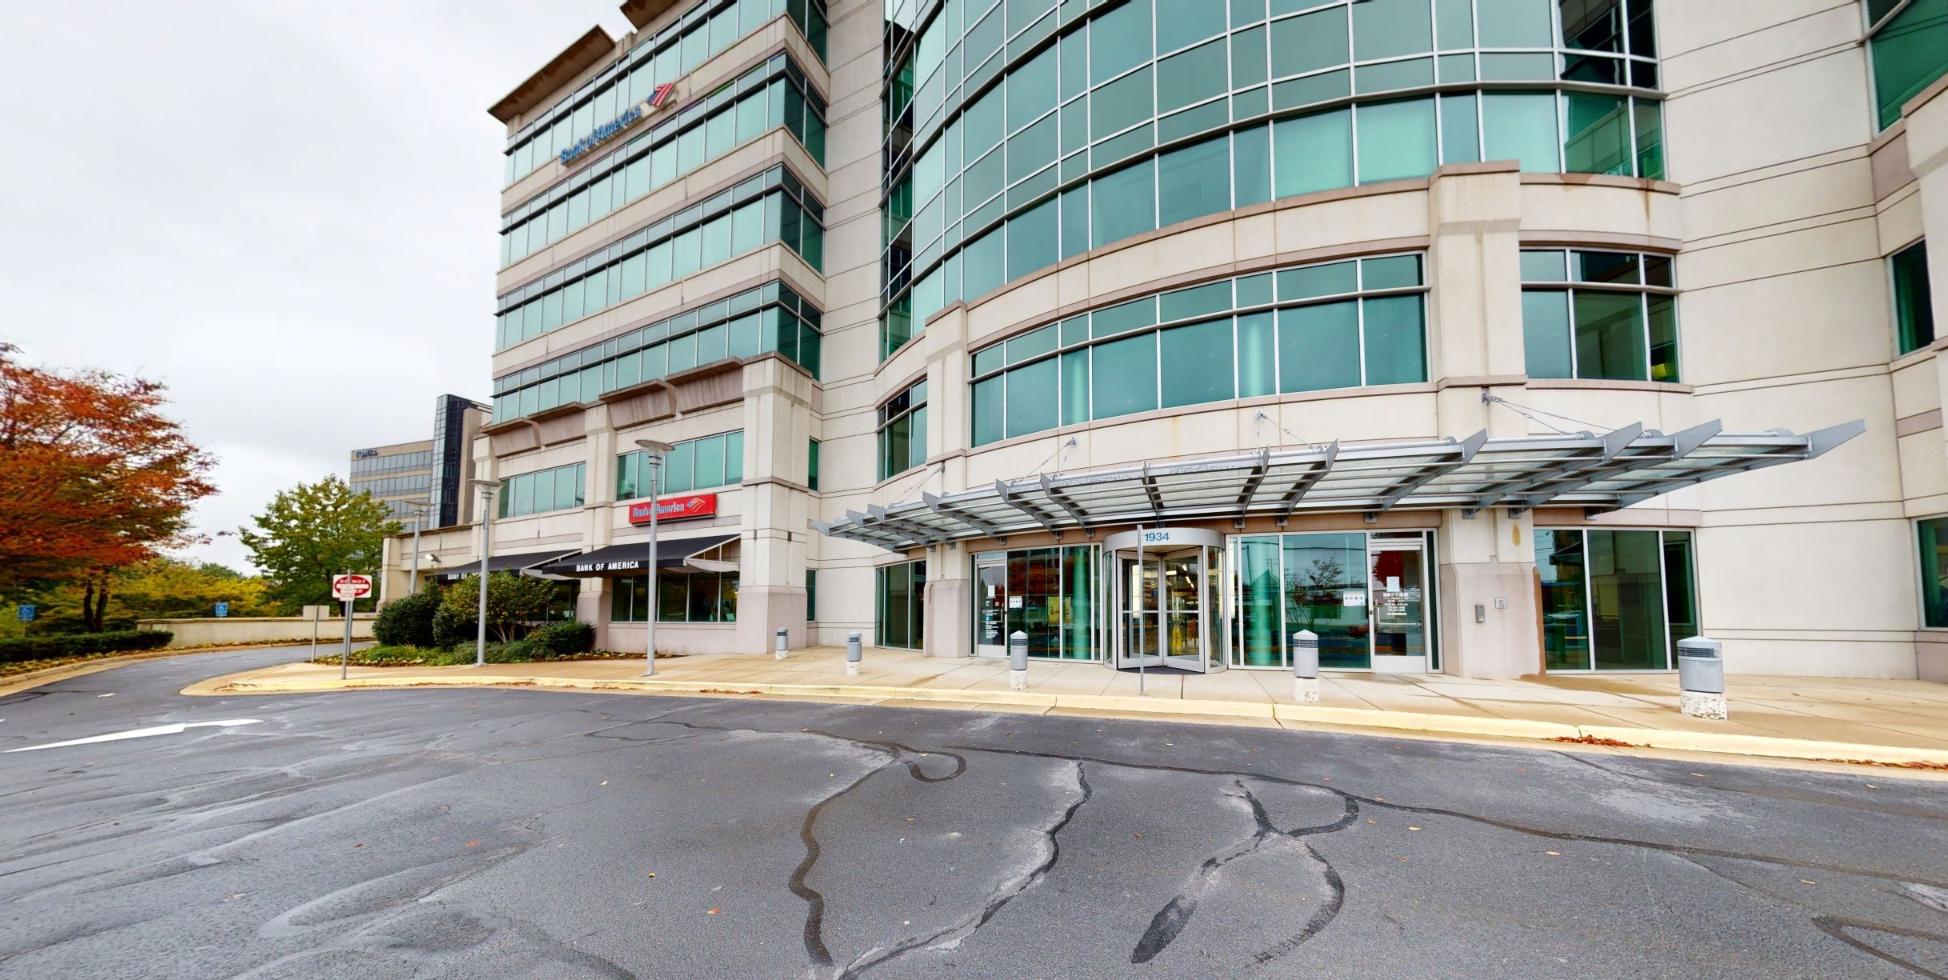 Bank of America financial center with drive-thru ATM | 1934 Old Gallows Rd, Vienna, VA 22182